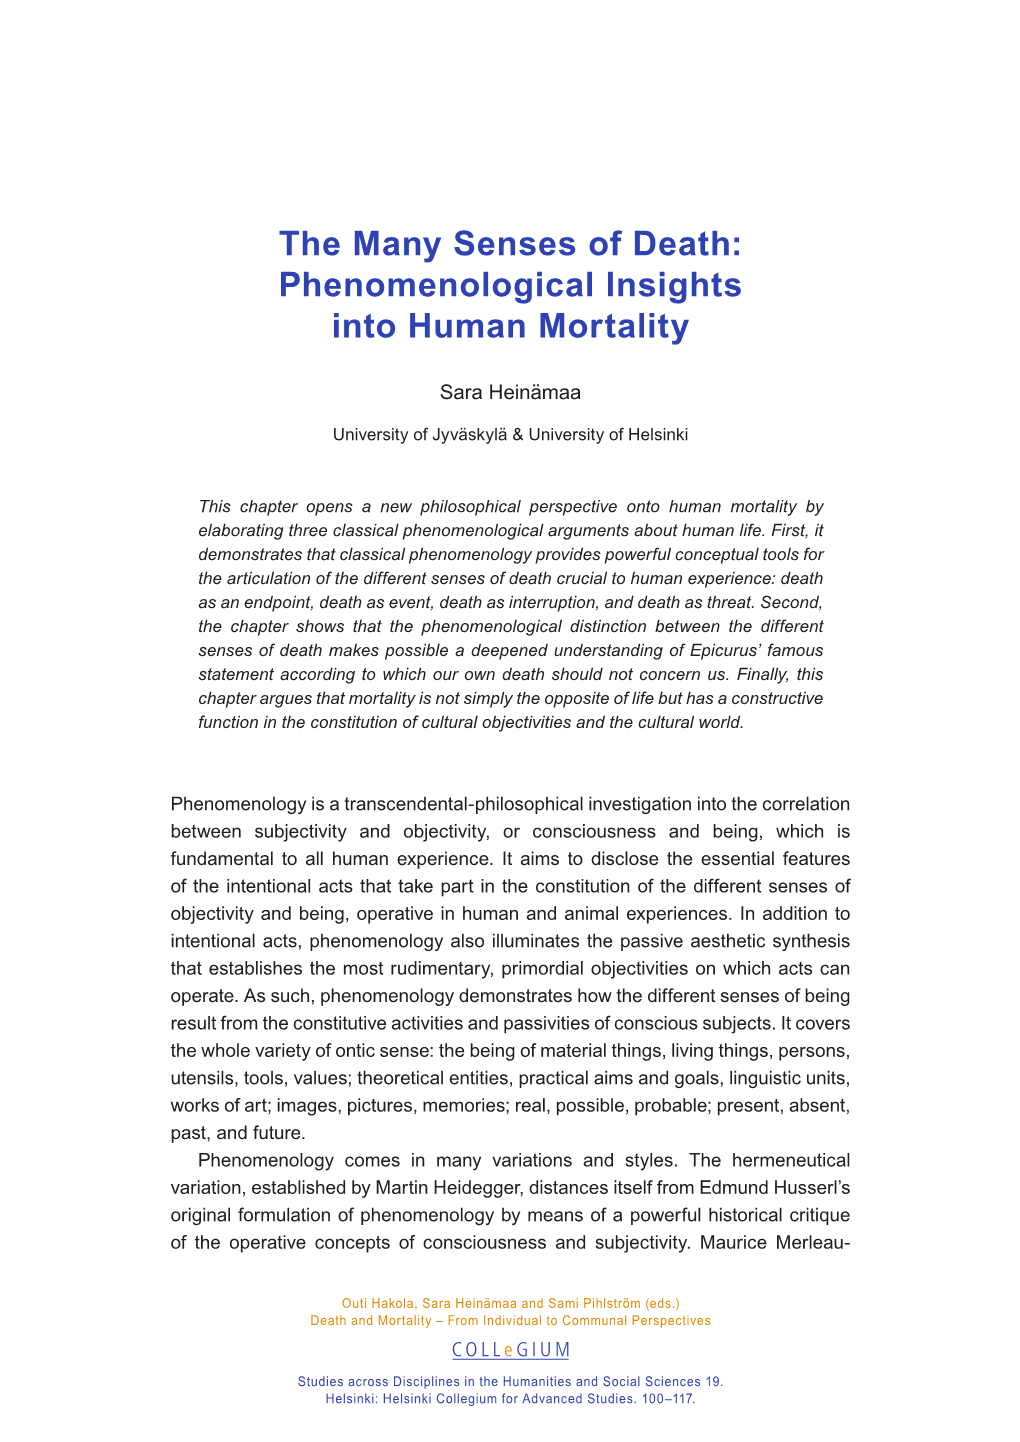 The Many Senses of Death: Phenomenological Insights Into Human Mortality